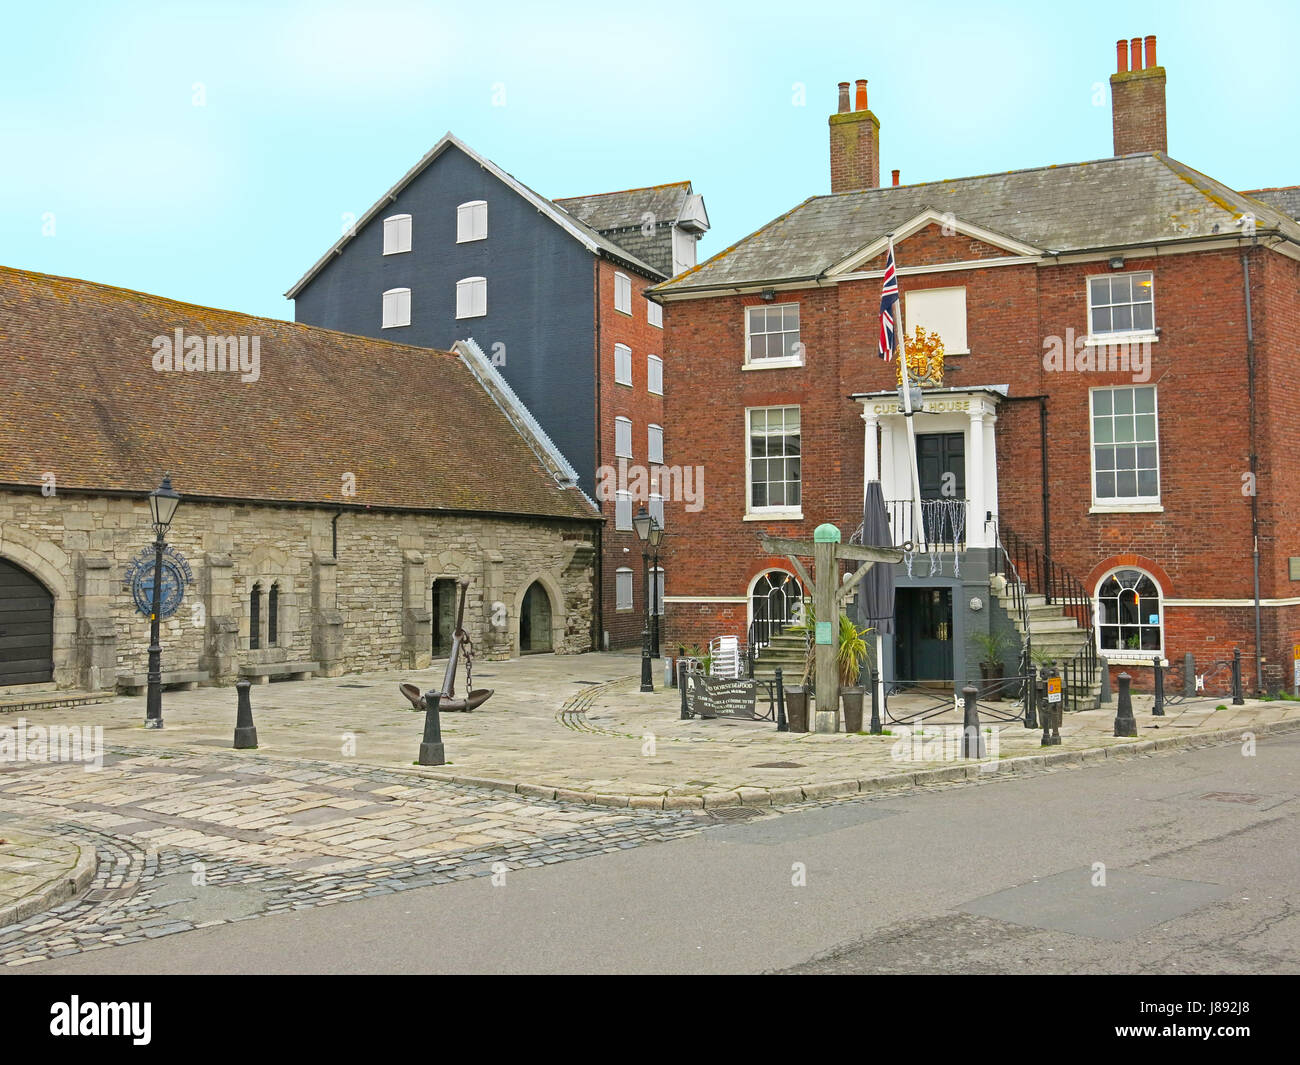 The historic Custom House on The Quay in Poole, Dorset, England Stock Photo